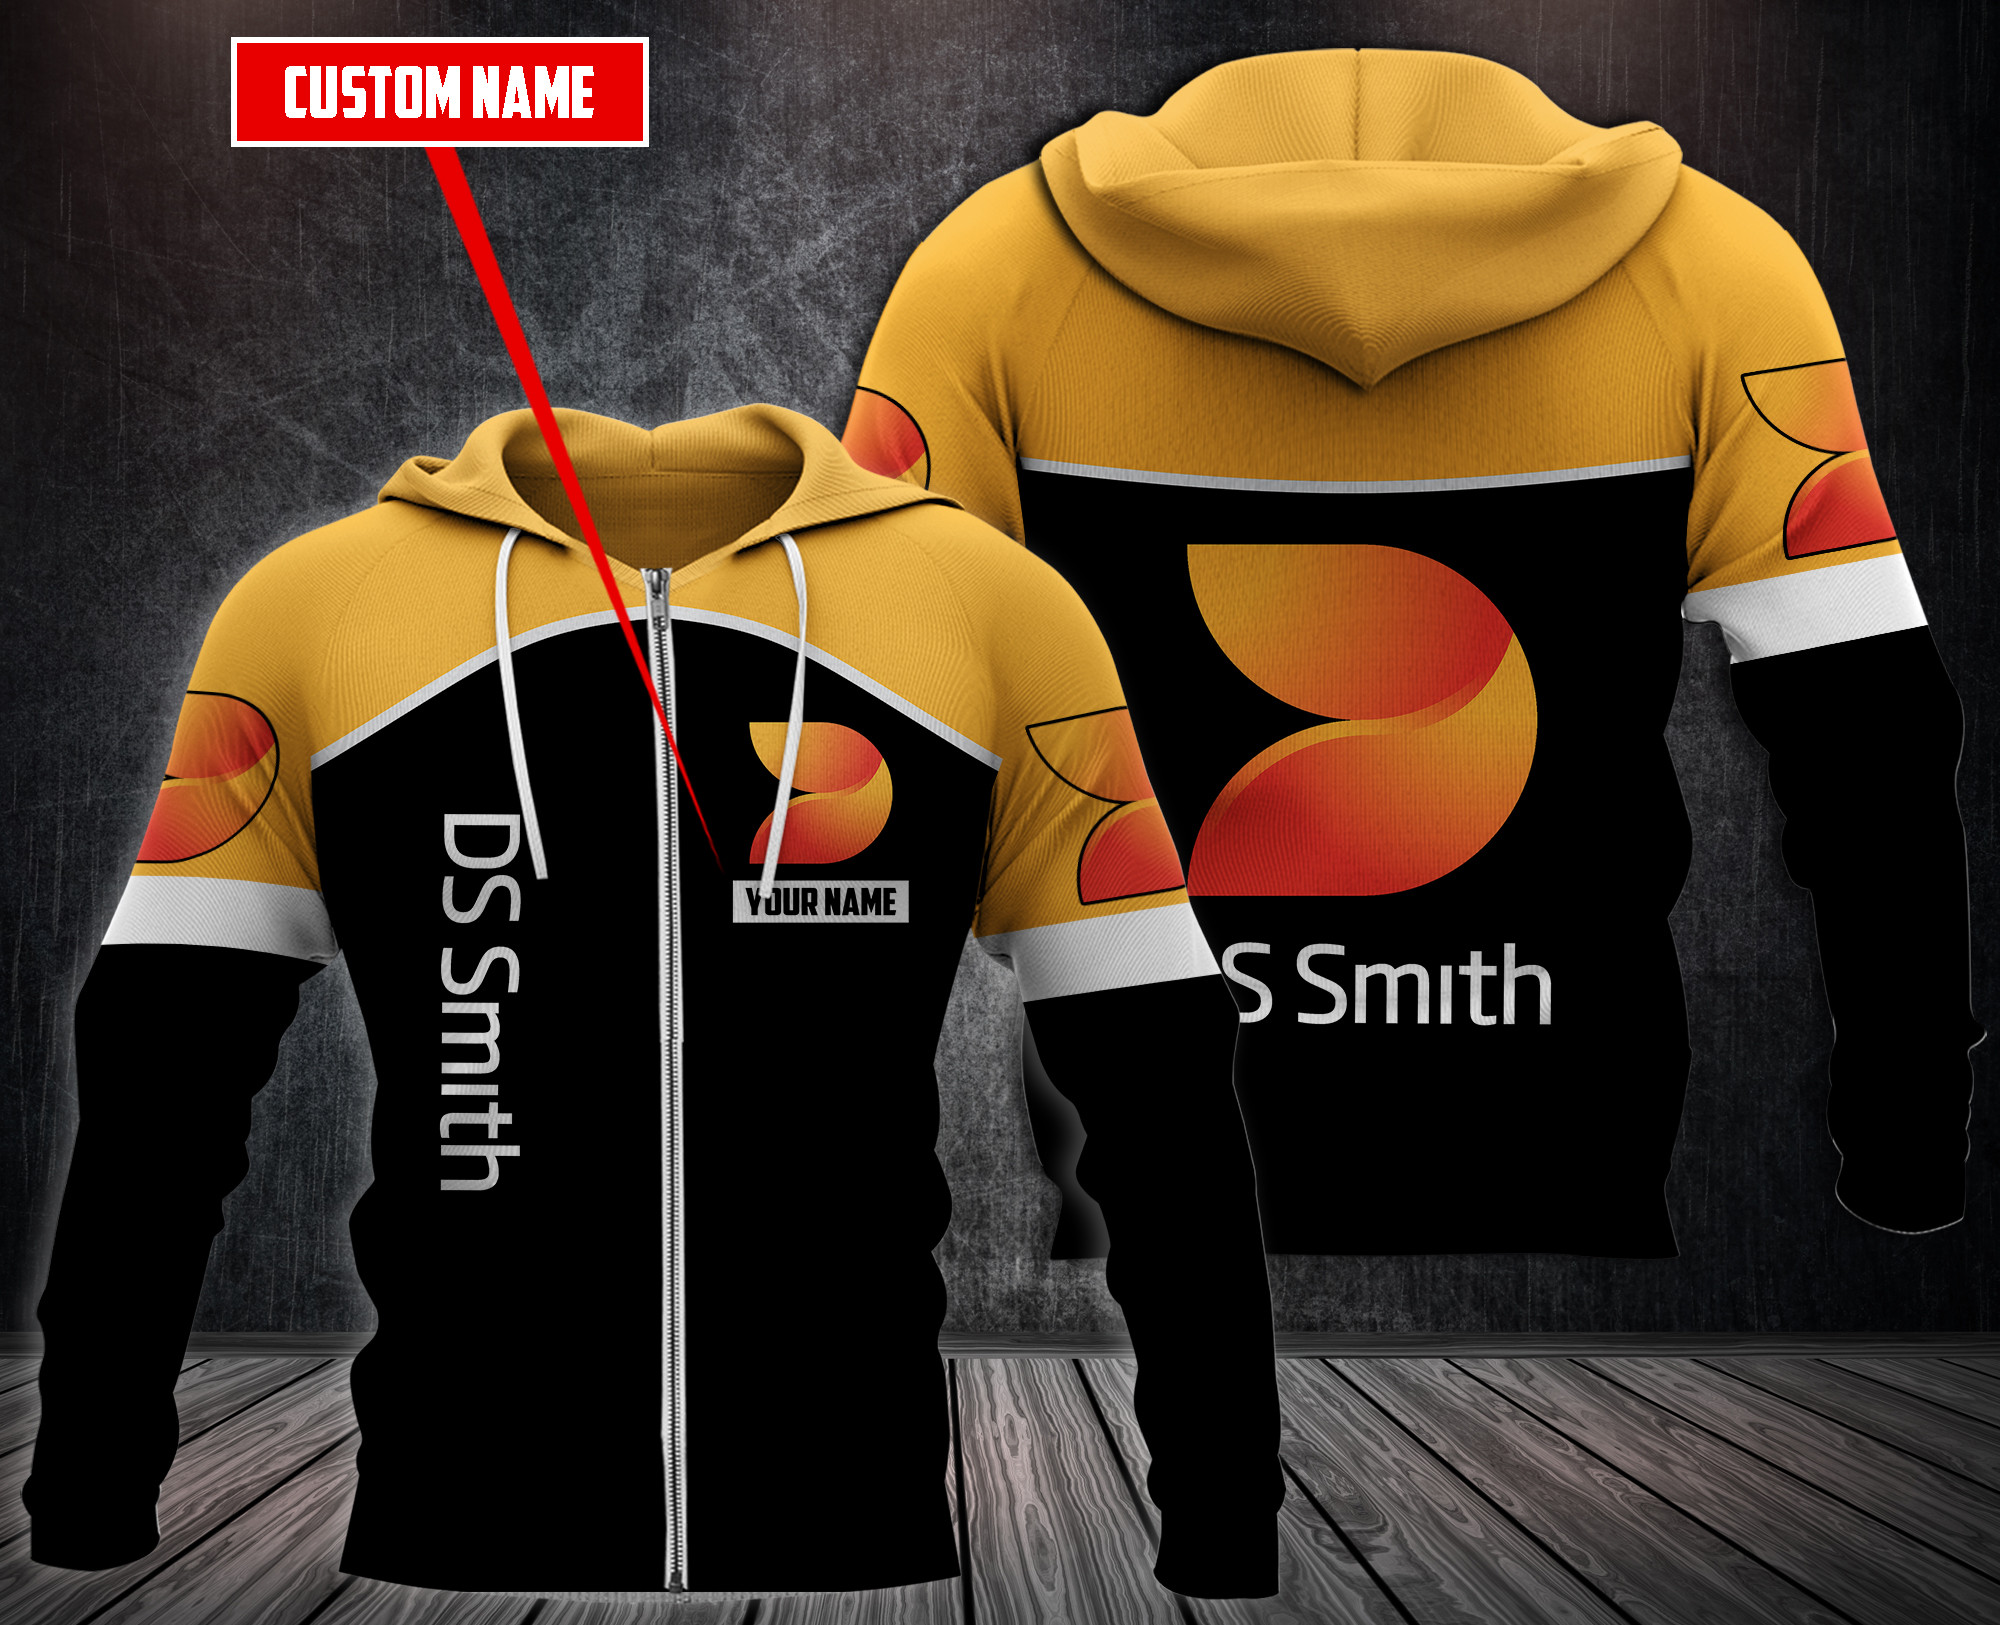 Choose the right hoodies for you on our boxboxshirt and ethershirt websites in 2022 119